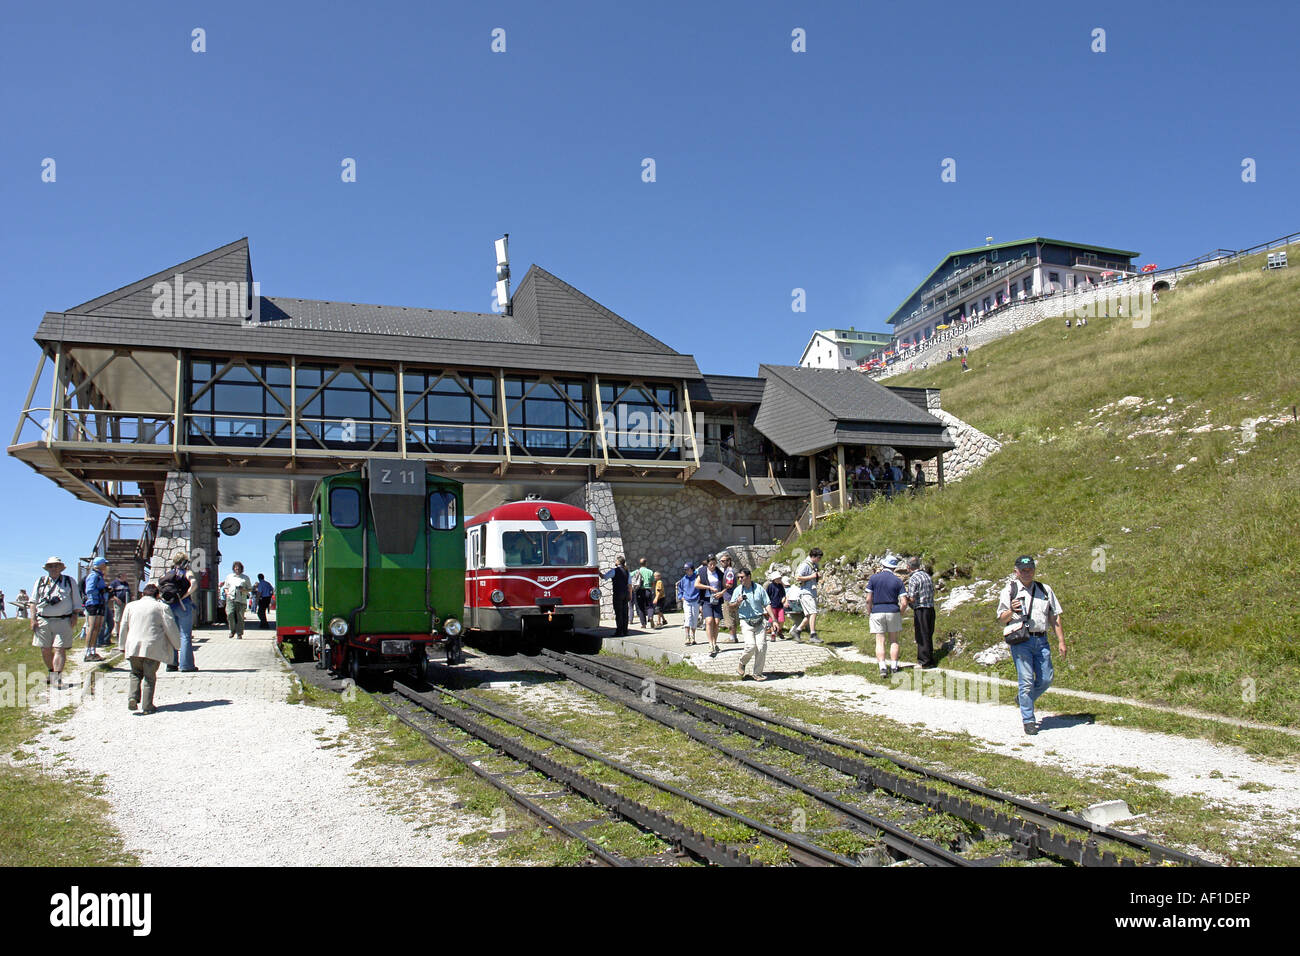 Steam engine Z 11 with green coaches waiting to take passengers from Schafberg to St. Wolfgang on a sunny summer day Stock Photo